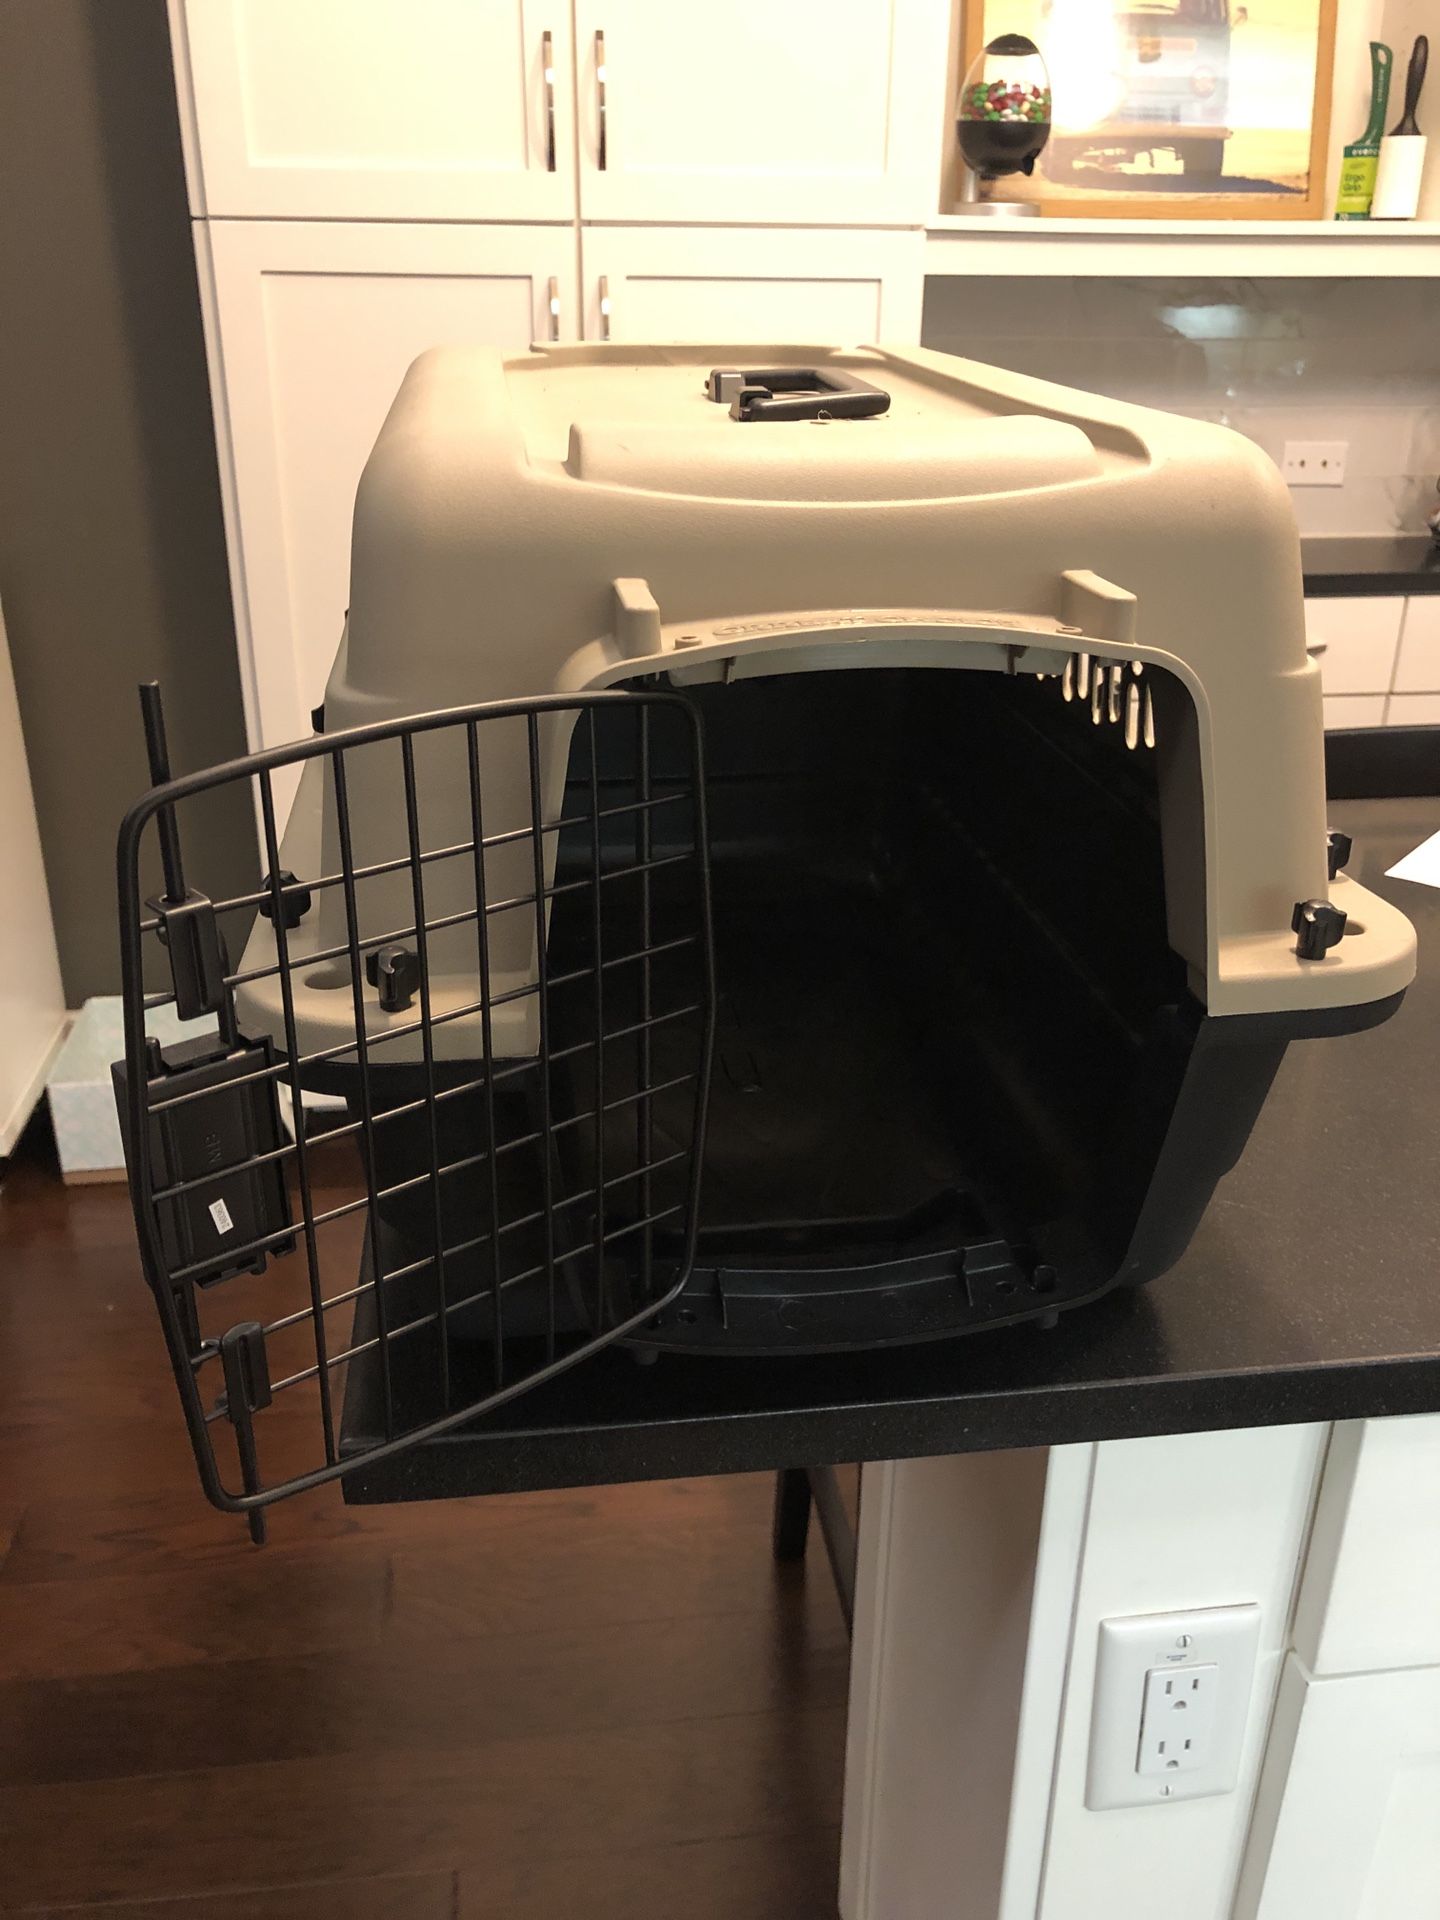 Pet carrier for cats or small dogs